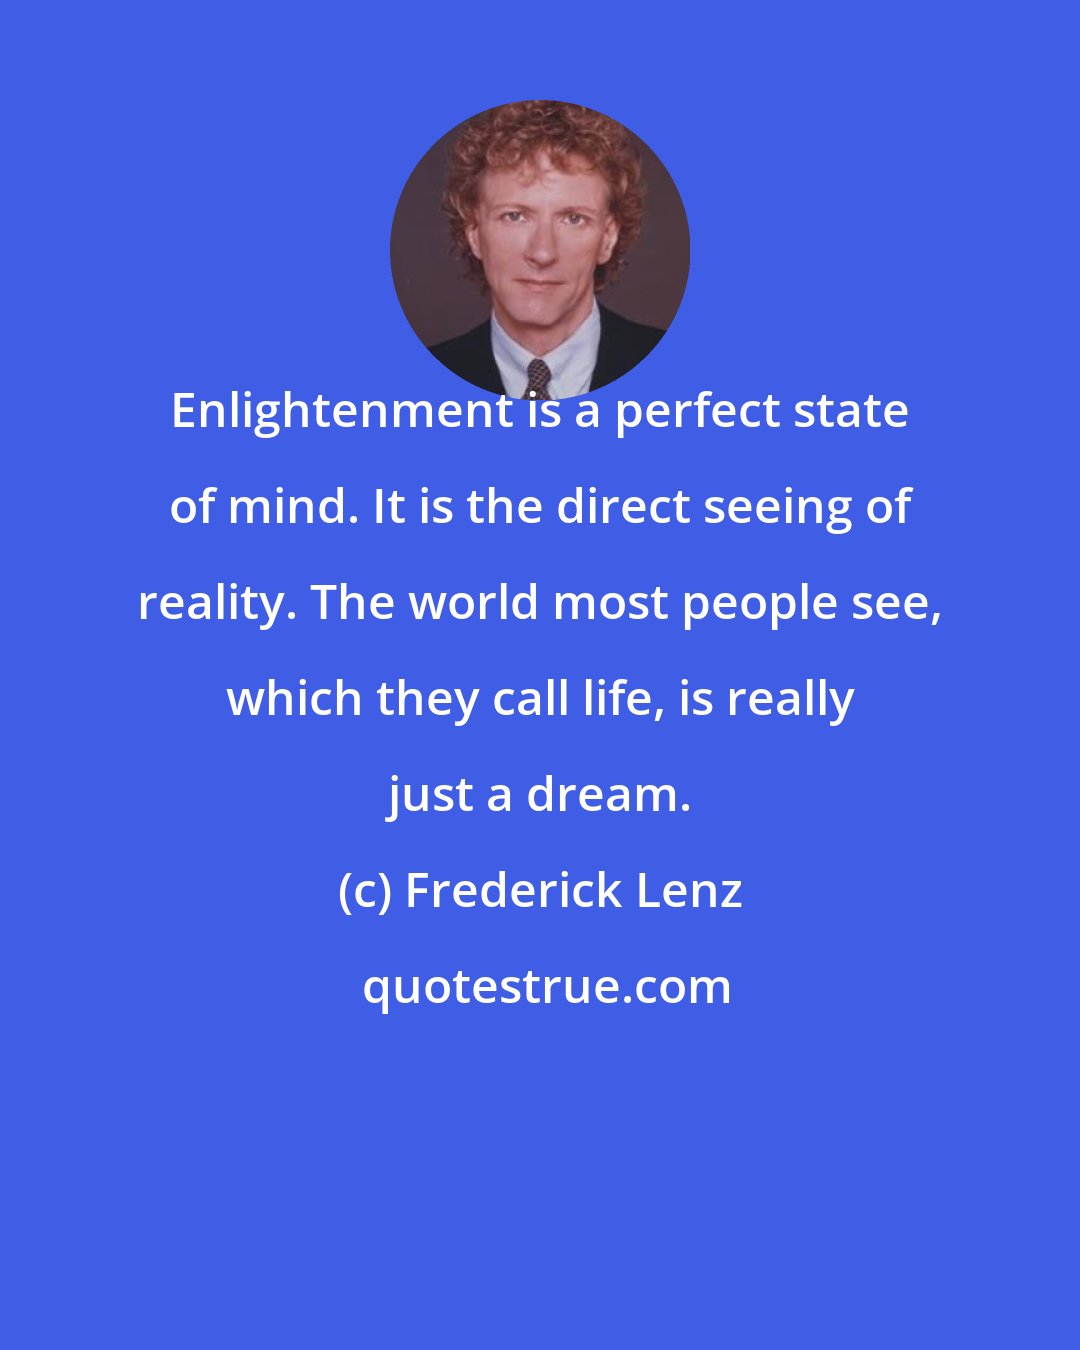 Frederick Lenz: Enlightenment is a perfect state of mind. It is the direct seeing of reality. The world most people see, which they call life, is really just a dream.